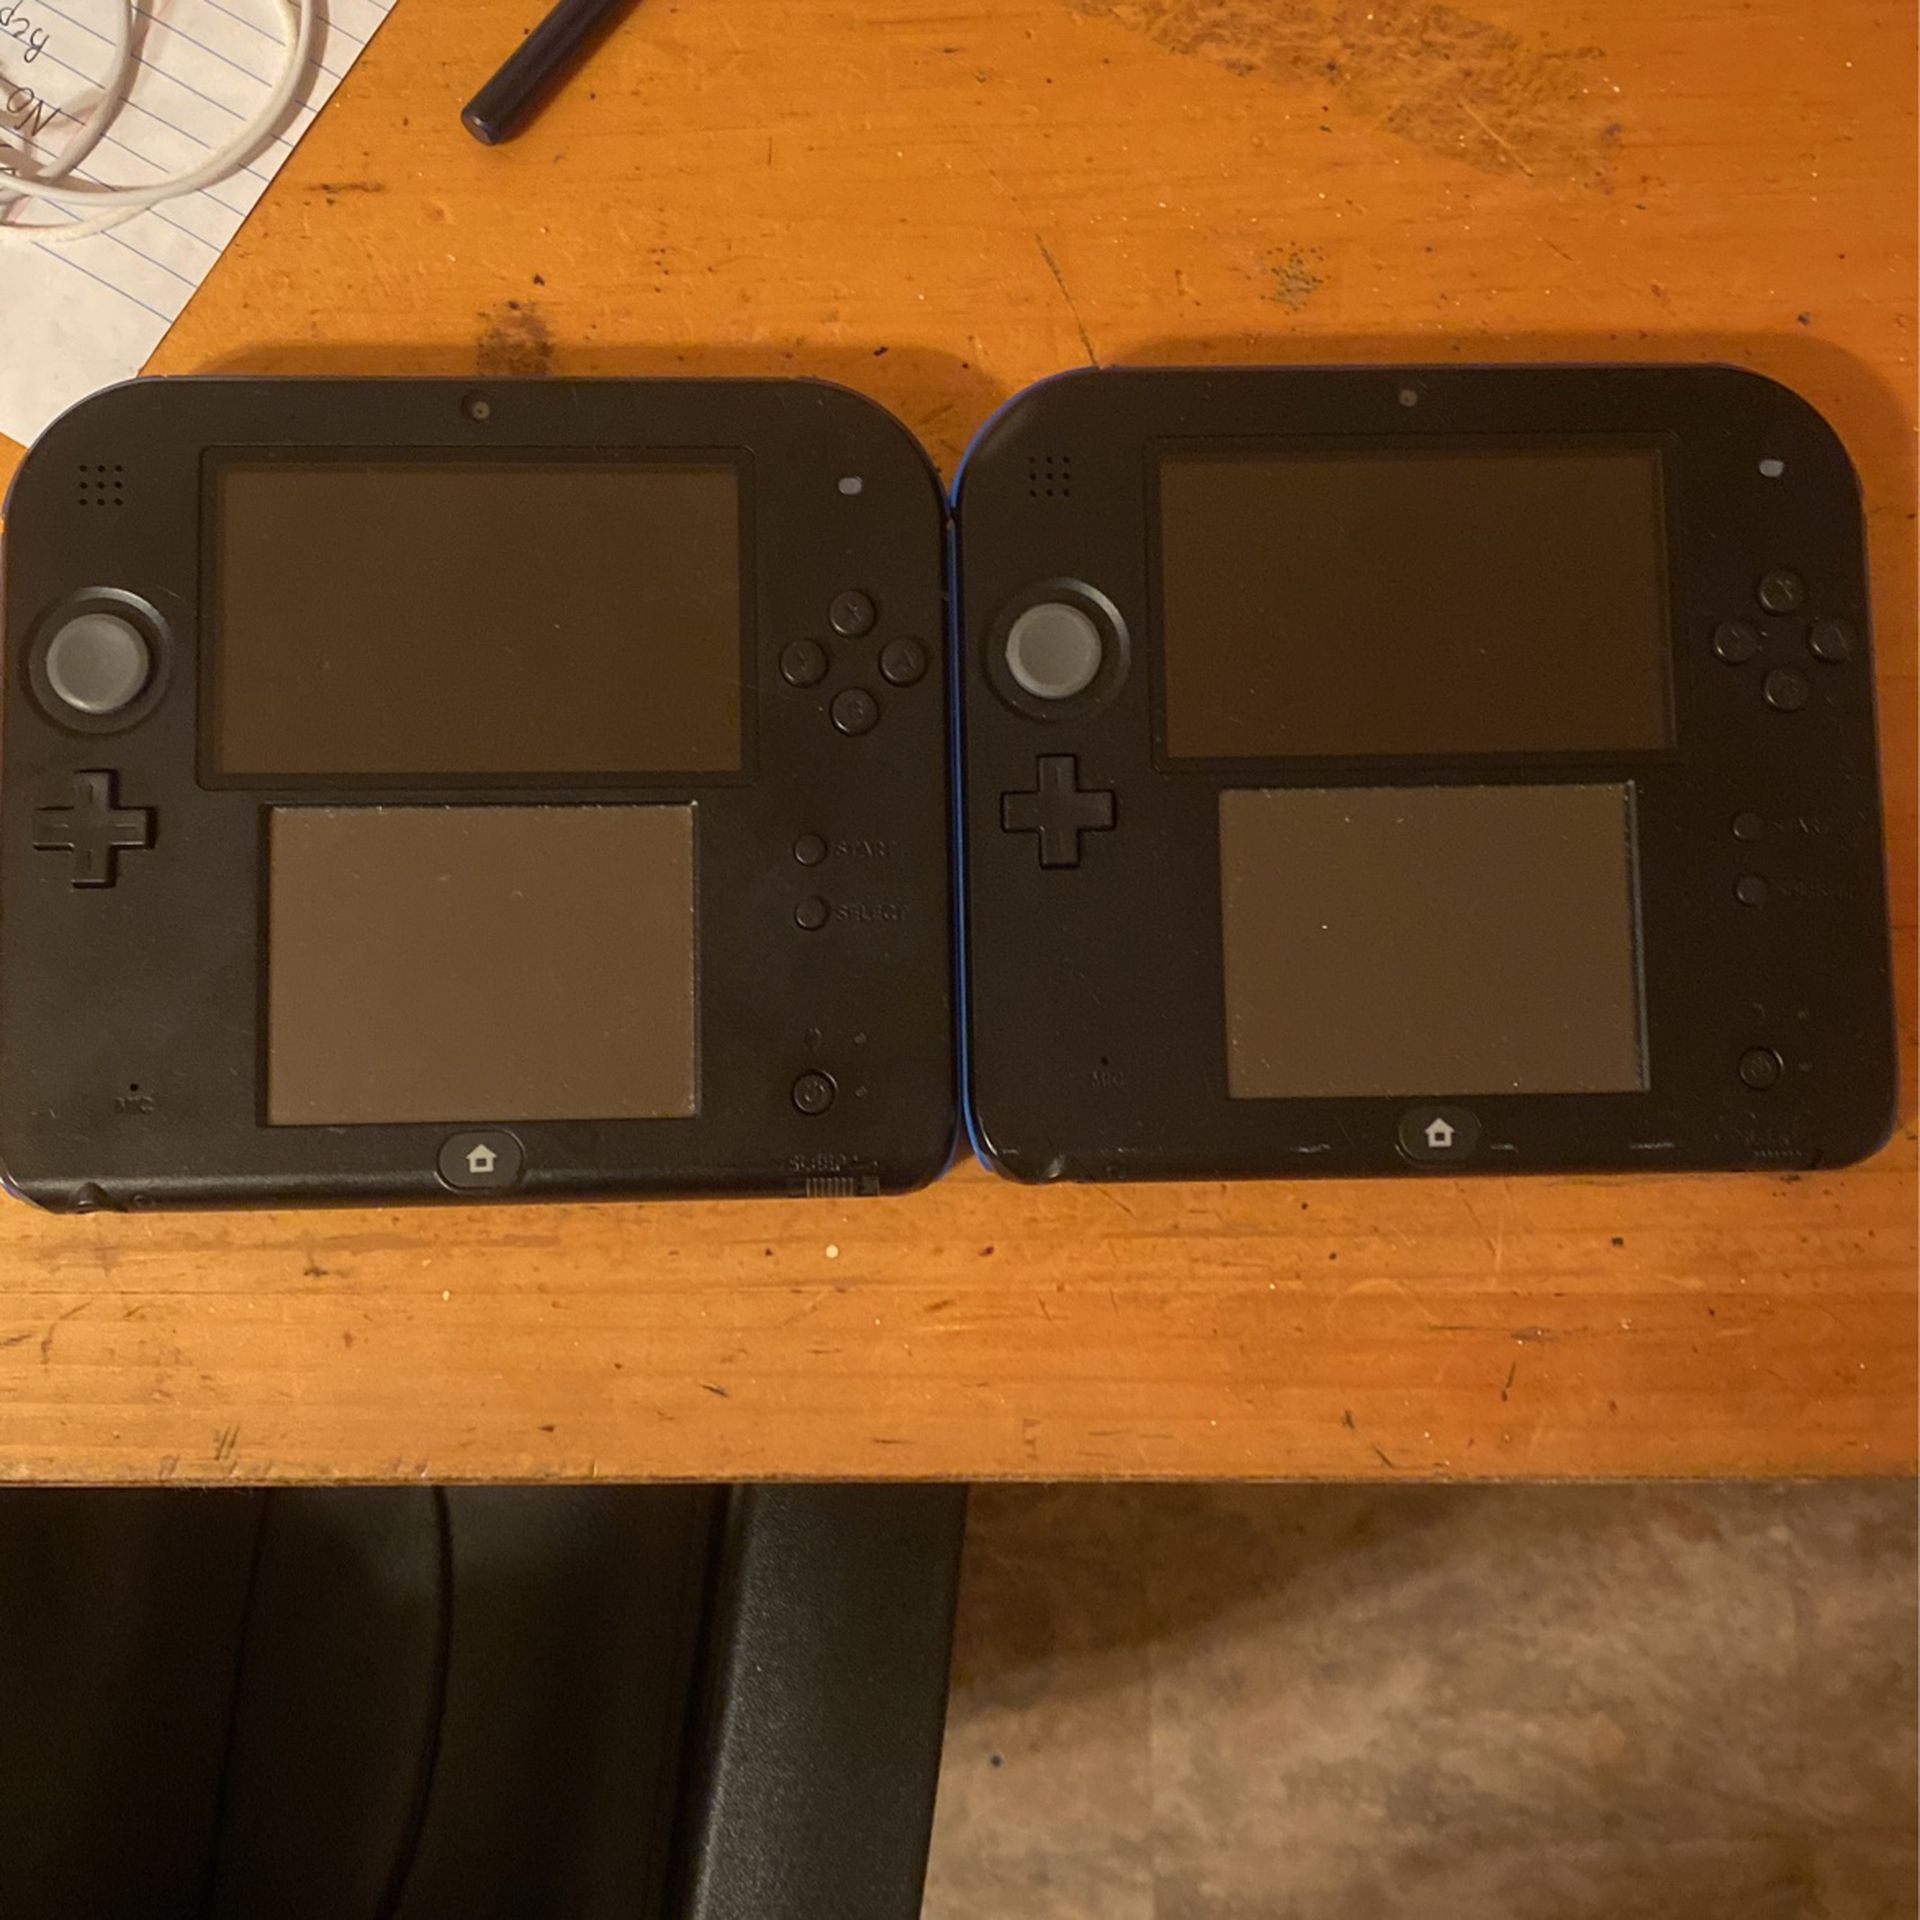 Two Nintendo 2DS